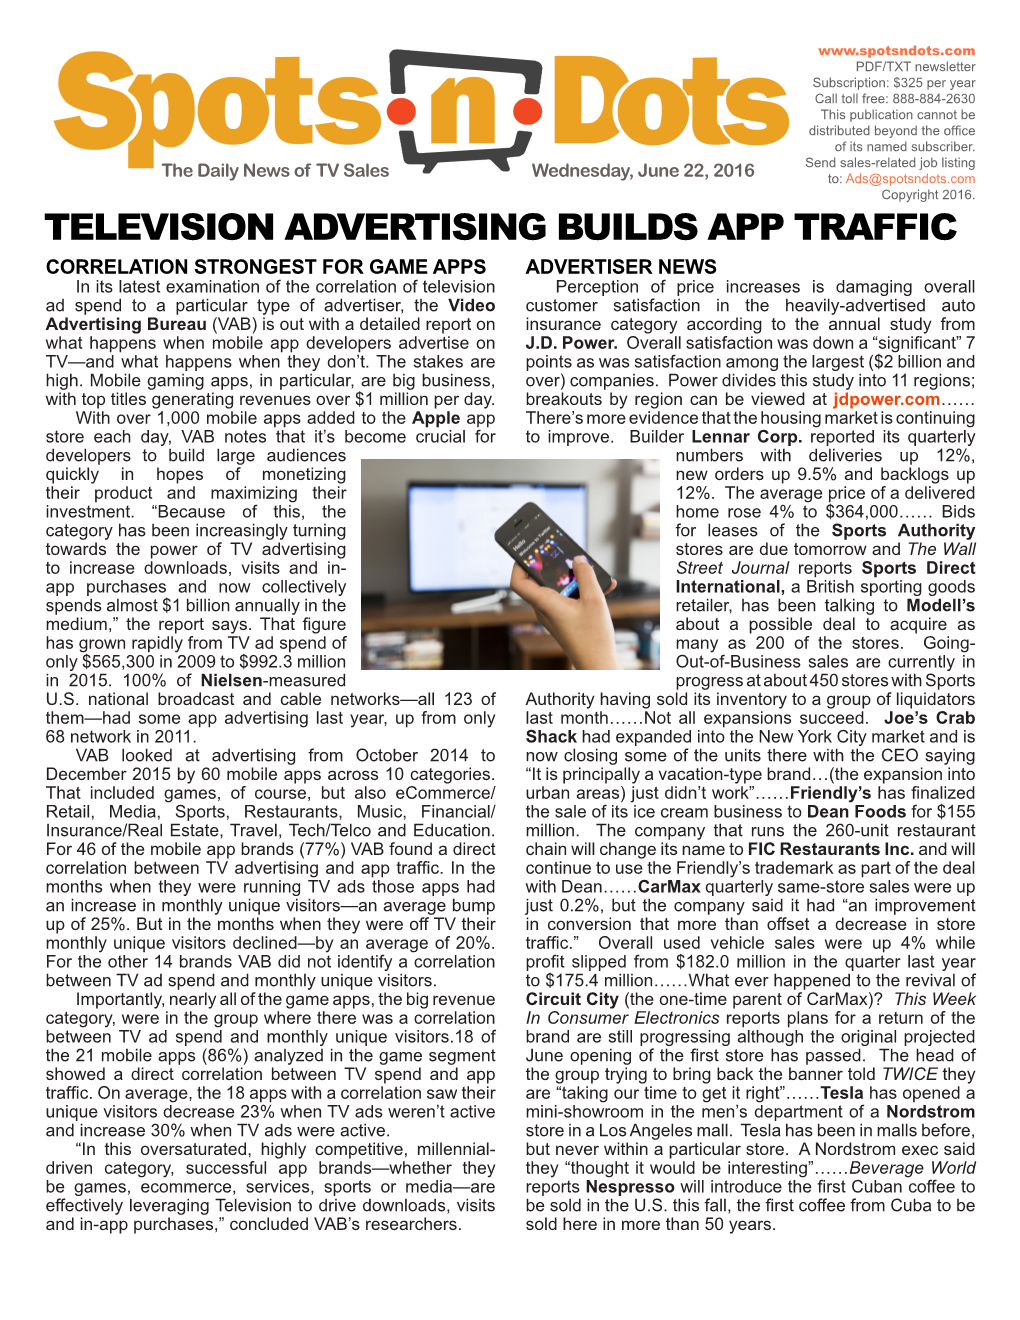 Television Advertising Builds App Traffic